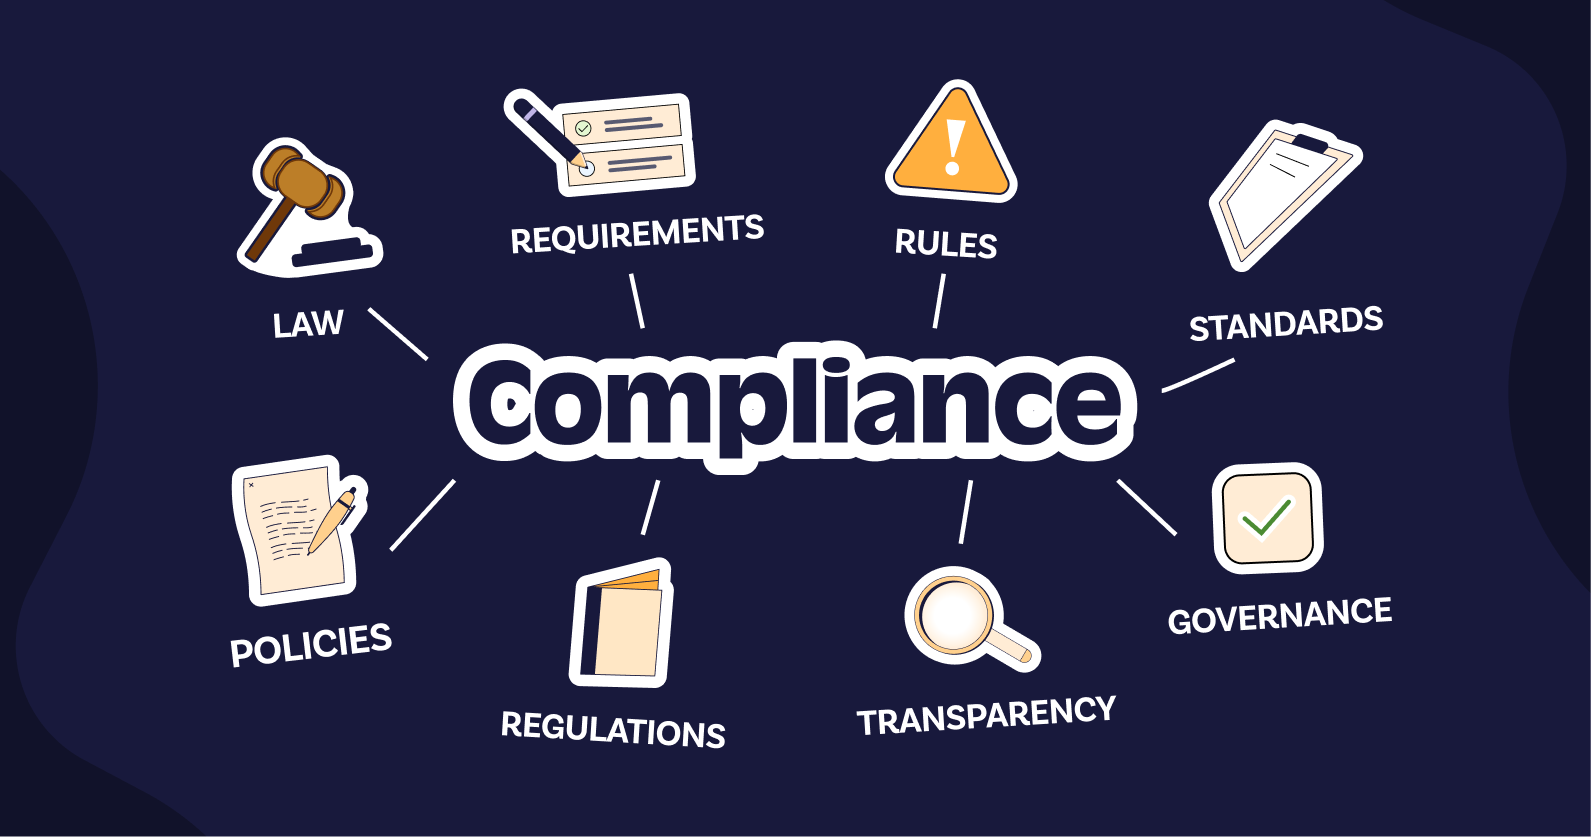 Example of all the requirements that need to be met to achieve continuous compliance.